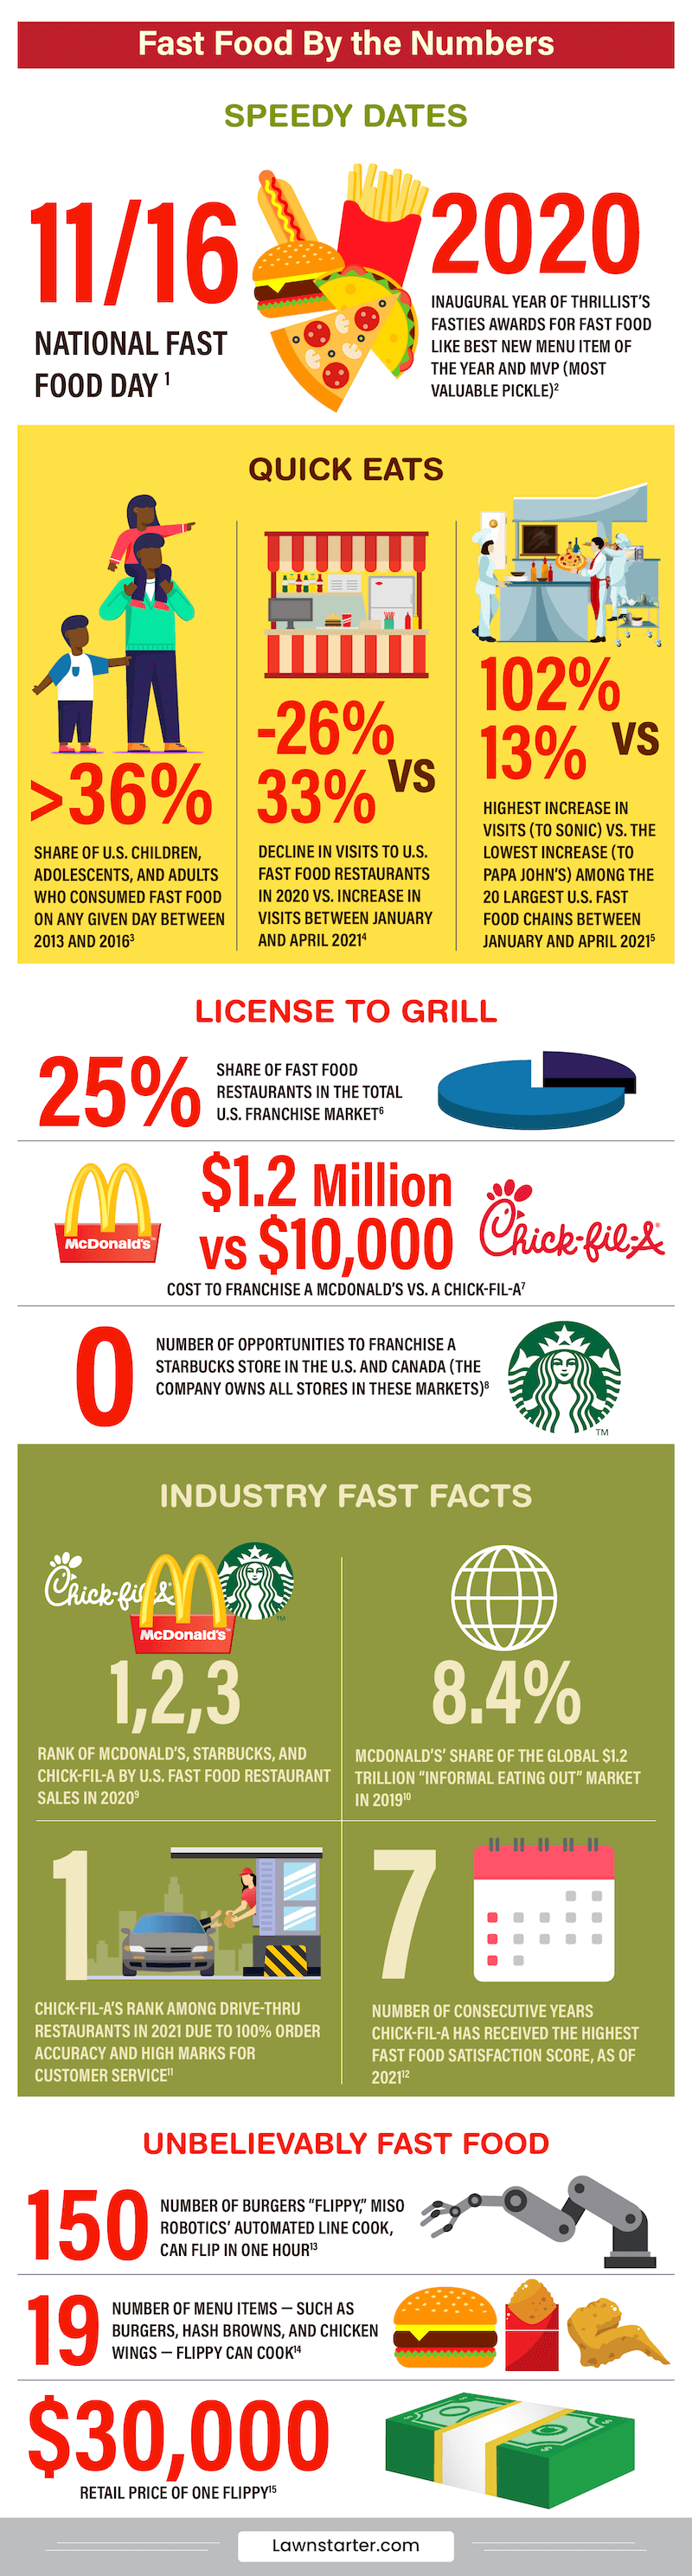 Infographic showing various fast food statistics